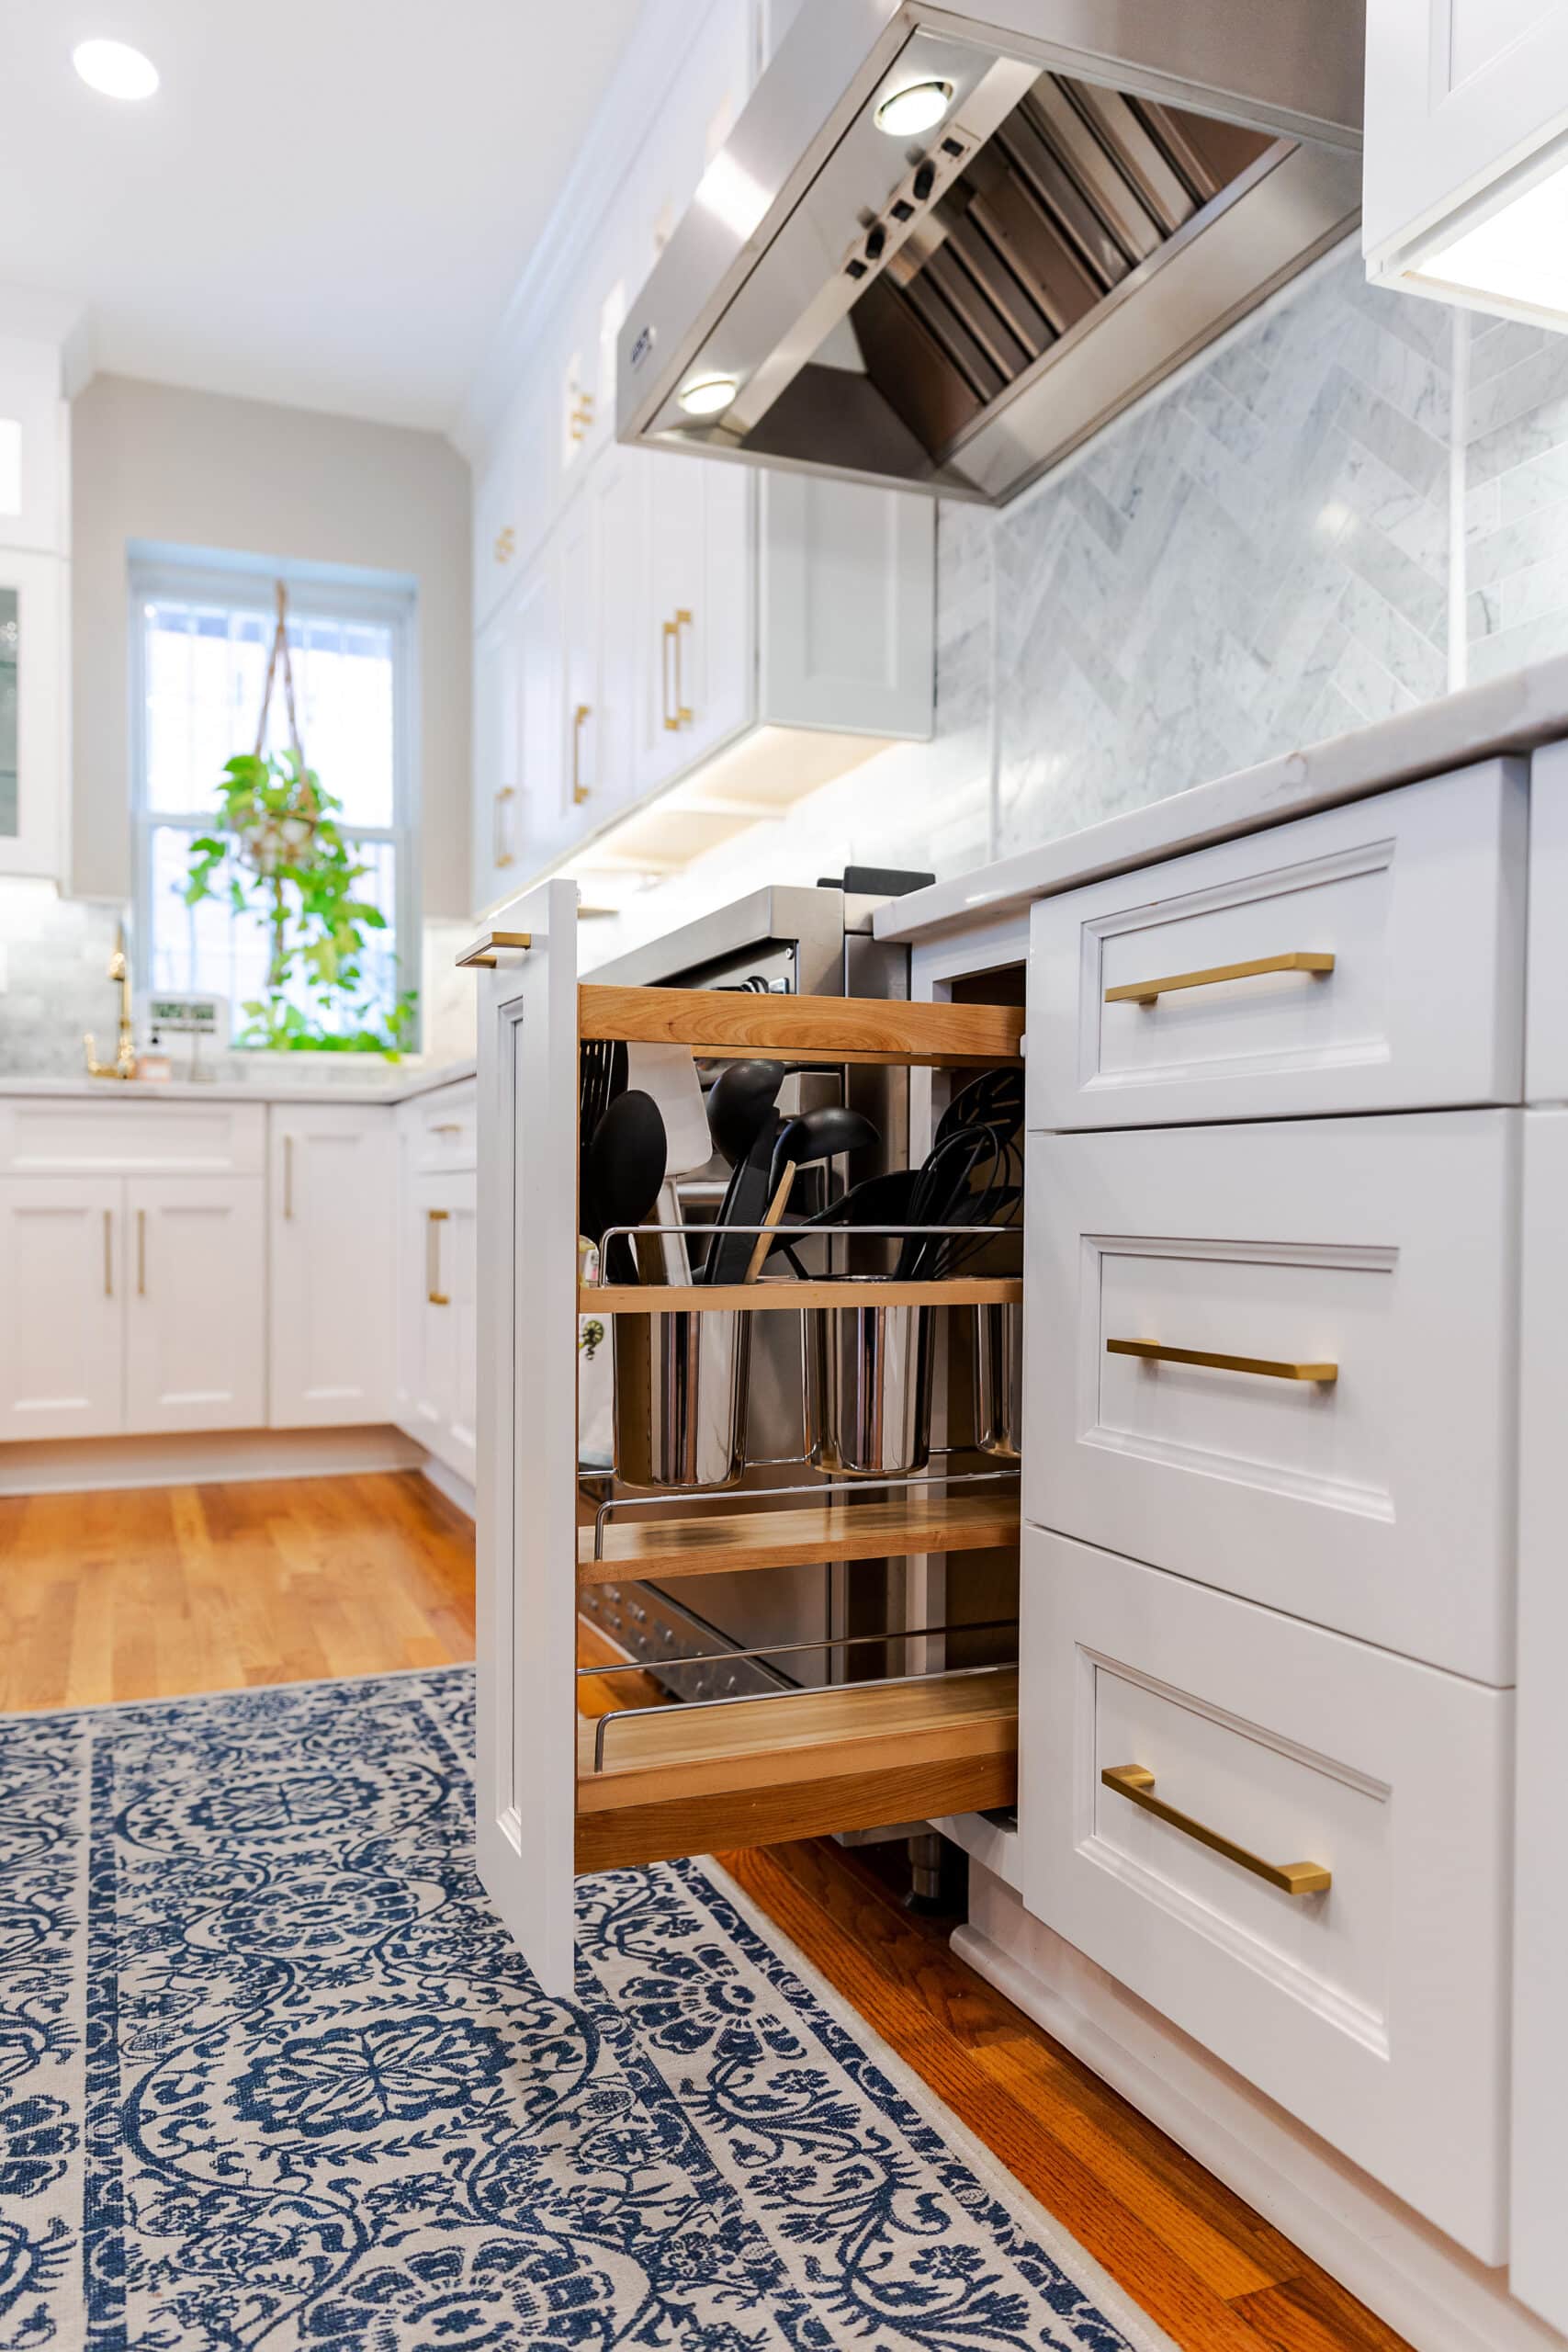 A White kitchen cabinets and drawers open